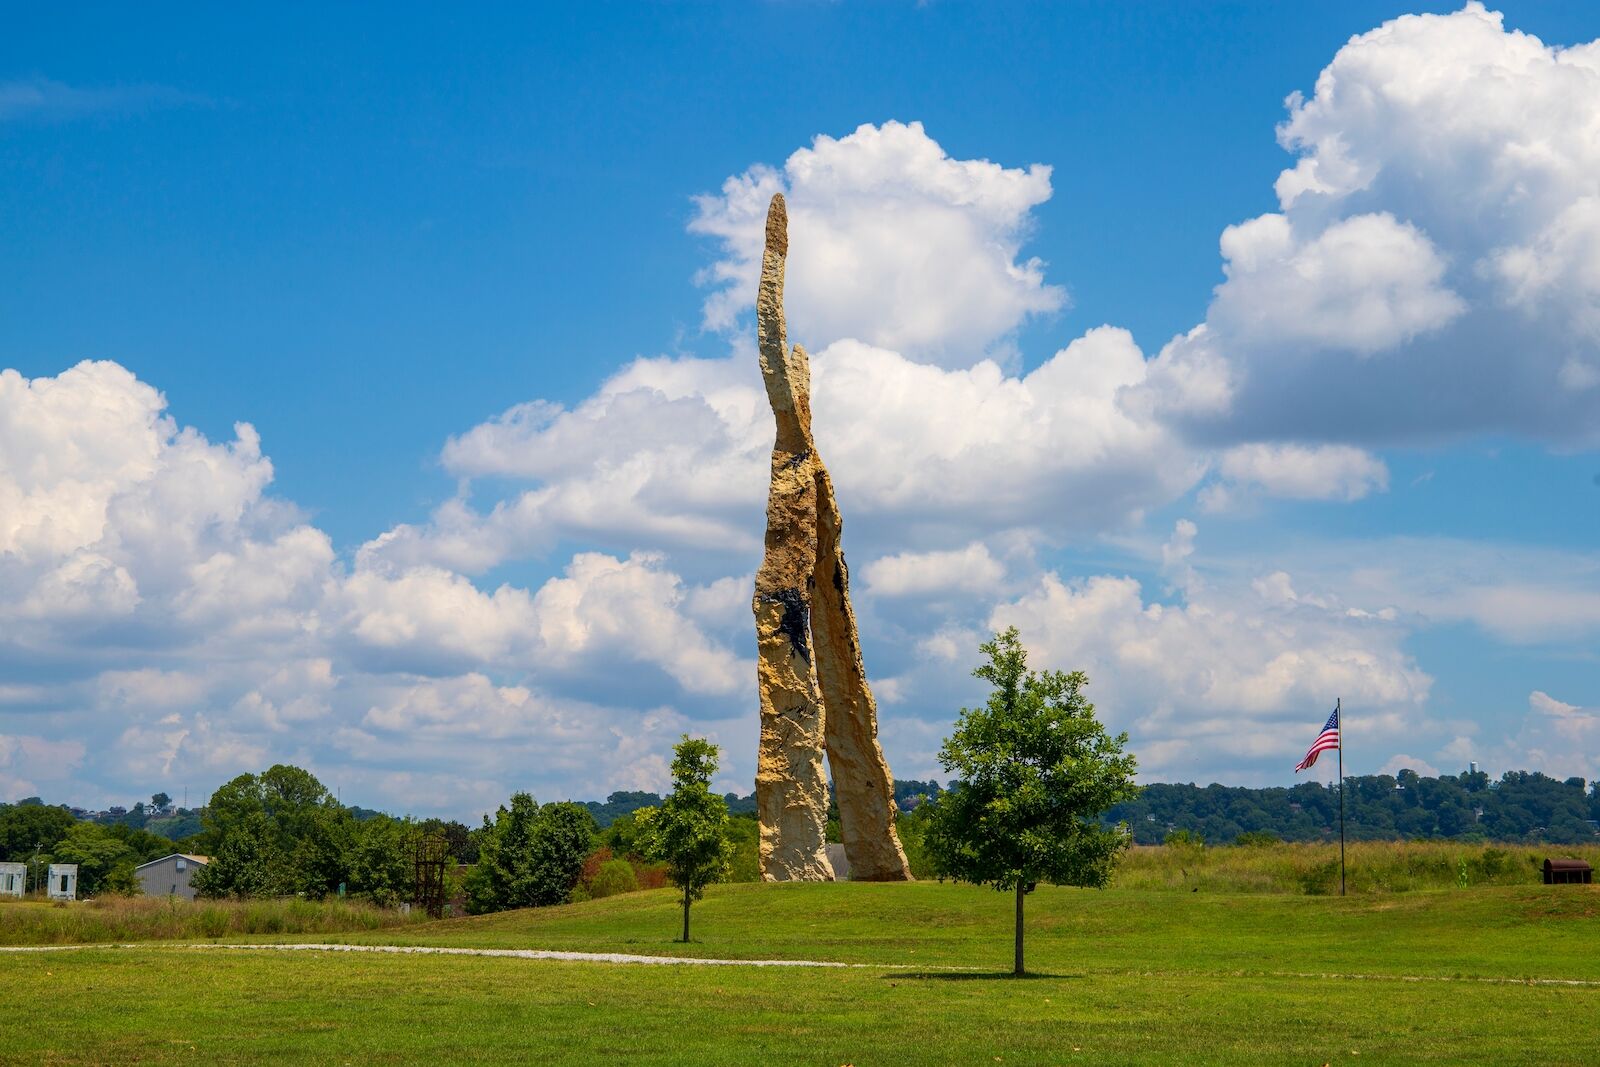 a gorgeous summer landscape in the park with sculptures and lush green trees, grass and plants with a gorgeous blue sky and powerful clouds at Sculpture Fields at Montague Park in Chattanooga